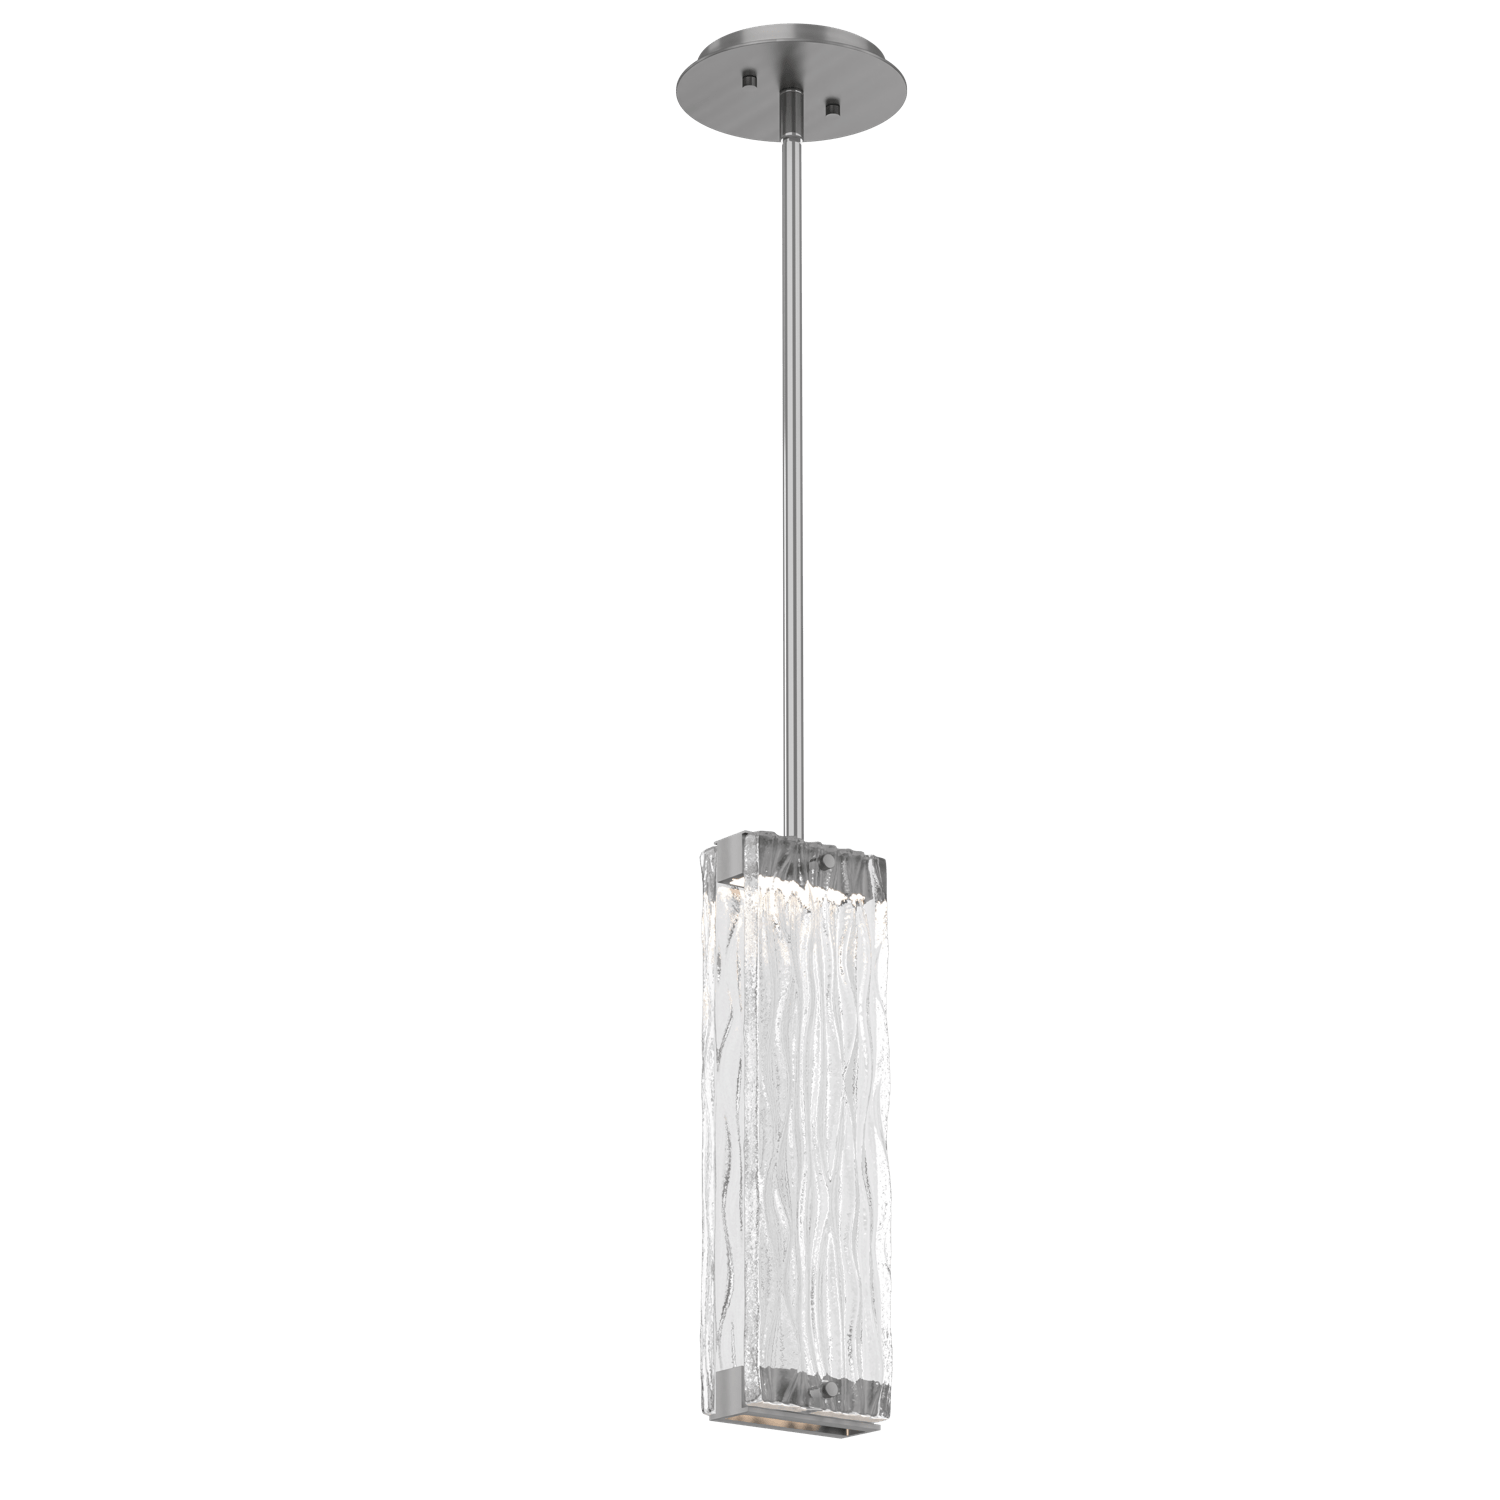 LAB0090-01-SN-TT-Hammerton-Studio-Tabulo-pendant-light-with-satin-nickel-finish-and-clear-tidal-cast-glass-shade-and-LED-lamping